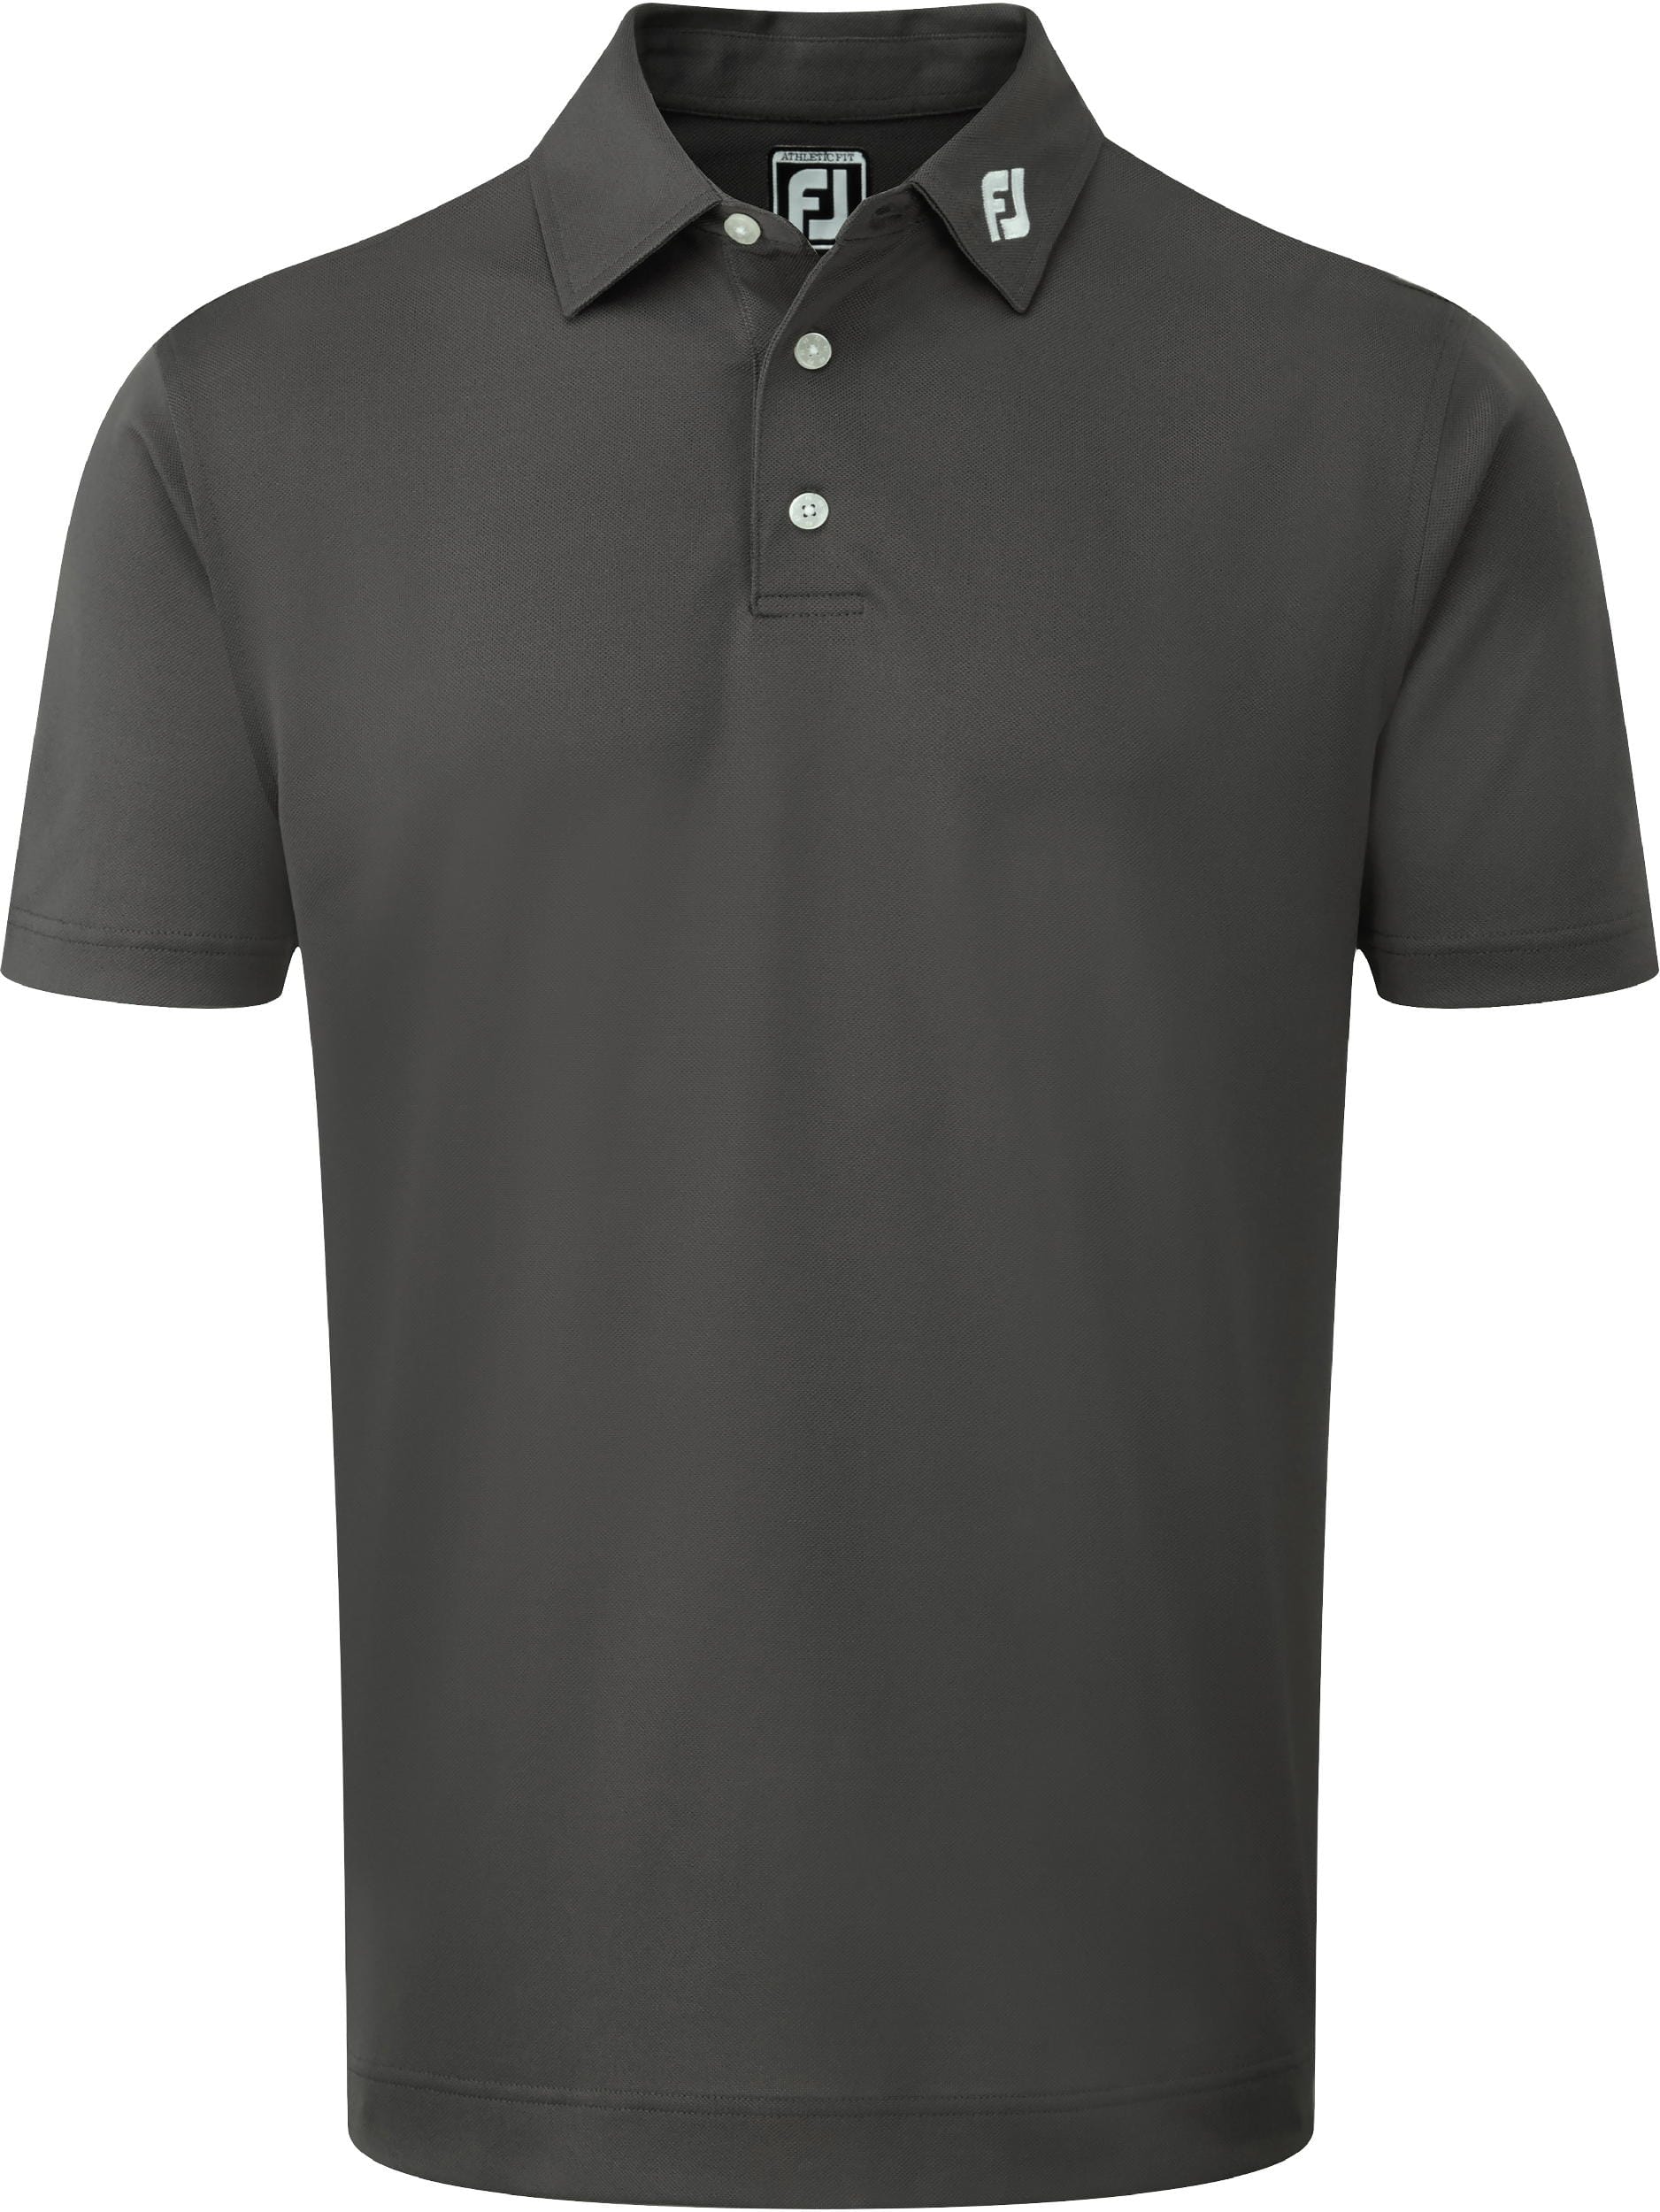 FootJoy Strech Pique Solid Polo, charcoal